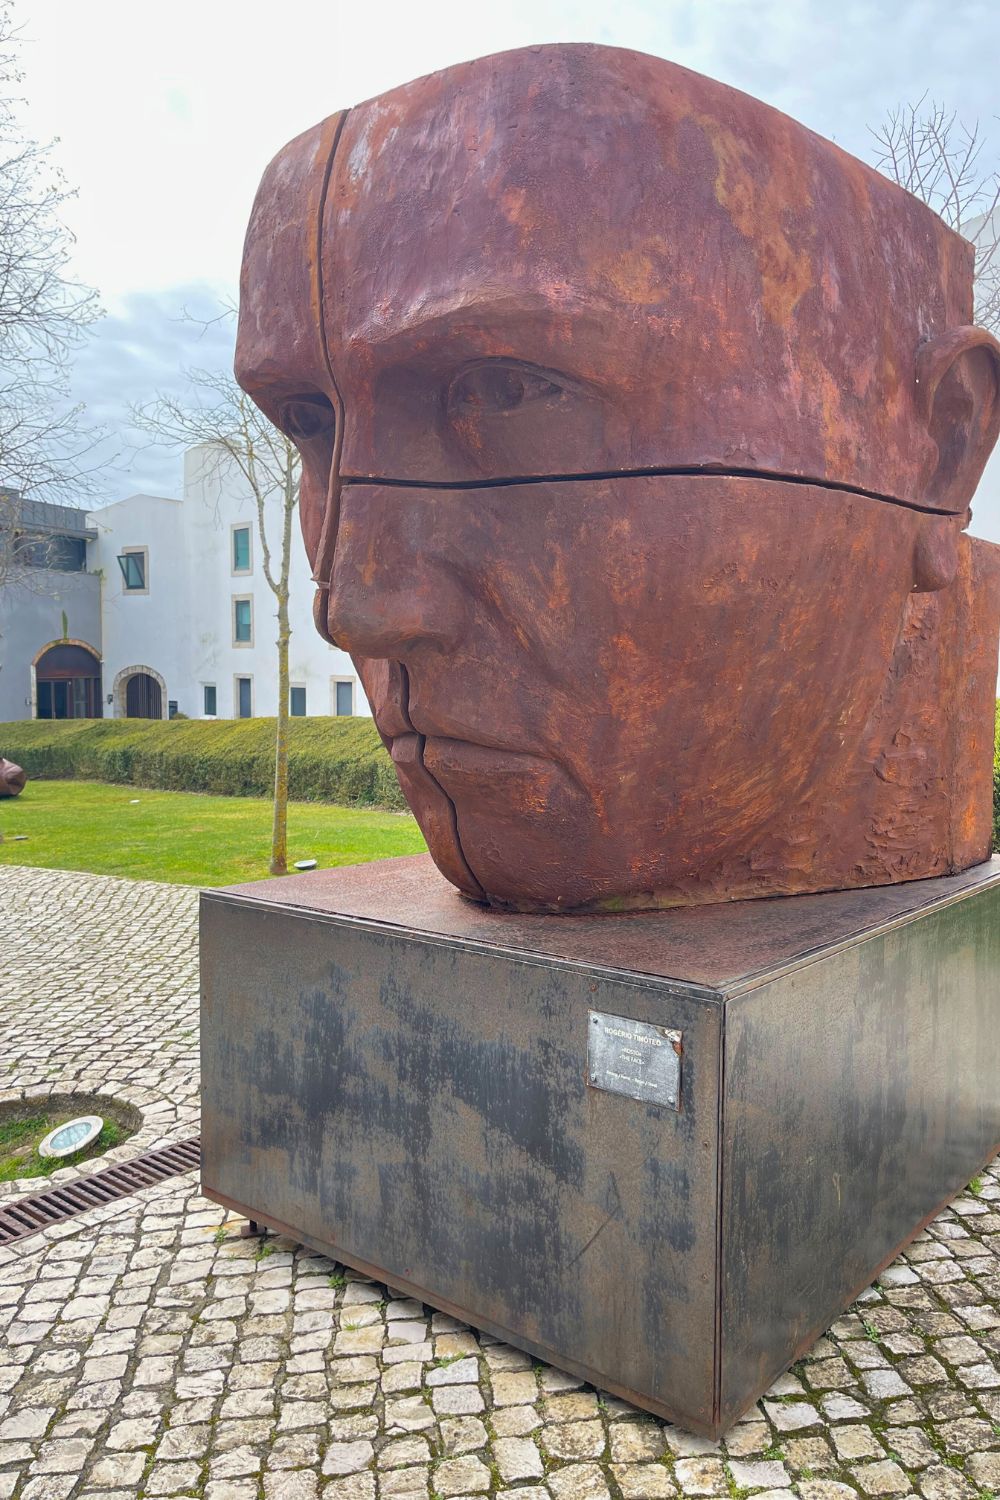 A large, rust-colored sculpture of a human head split into sections, displayed outdoors on a stone-paved area with a sparse grass lawn and part of a modern white building in the background, presenting a striking contrast between art and architecture.